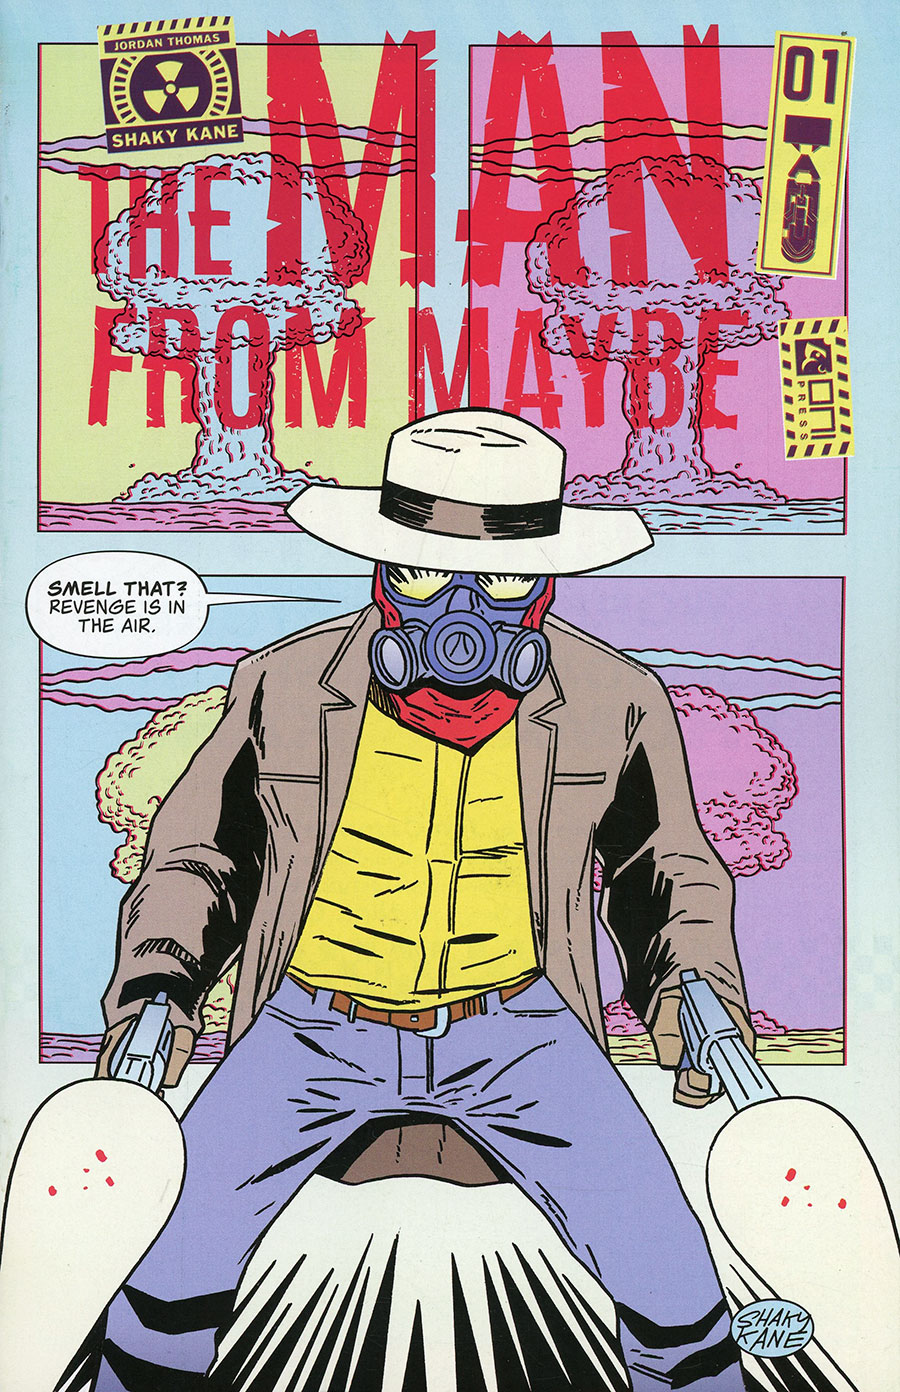 Man From Maybe #1 Cover A Regular Shaky Kane Cover (Filled Randomly With 1 Of 5 Covers)